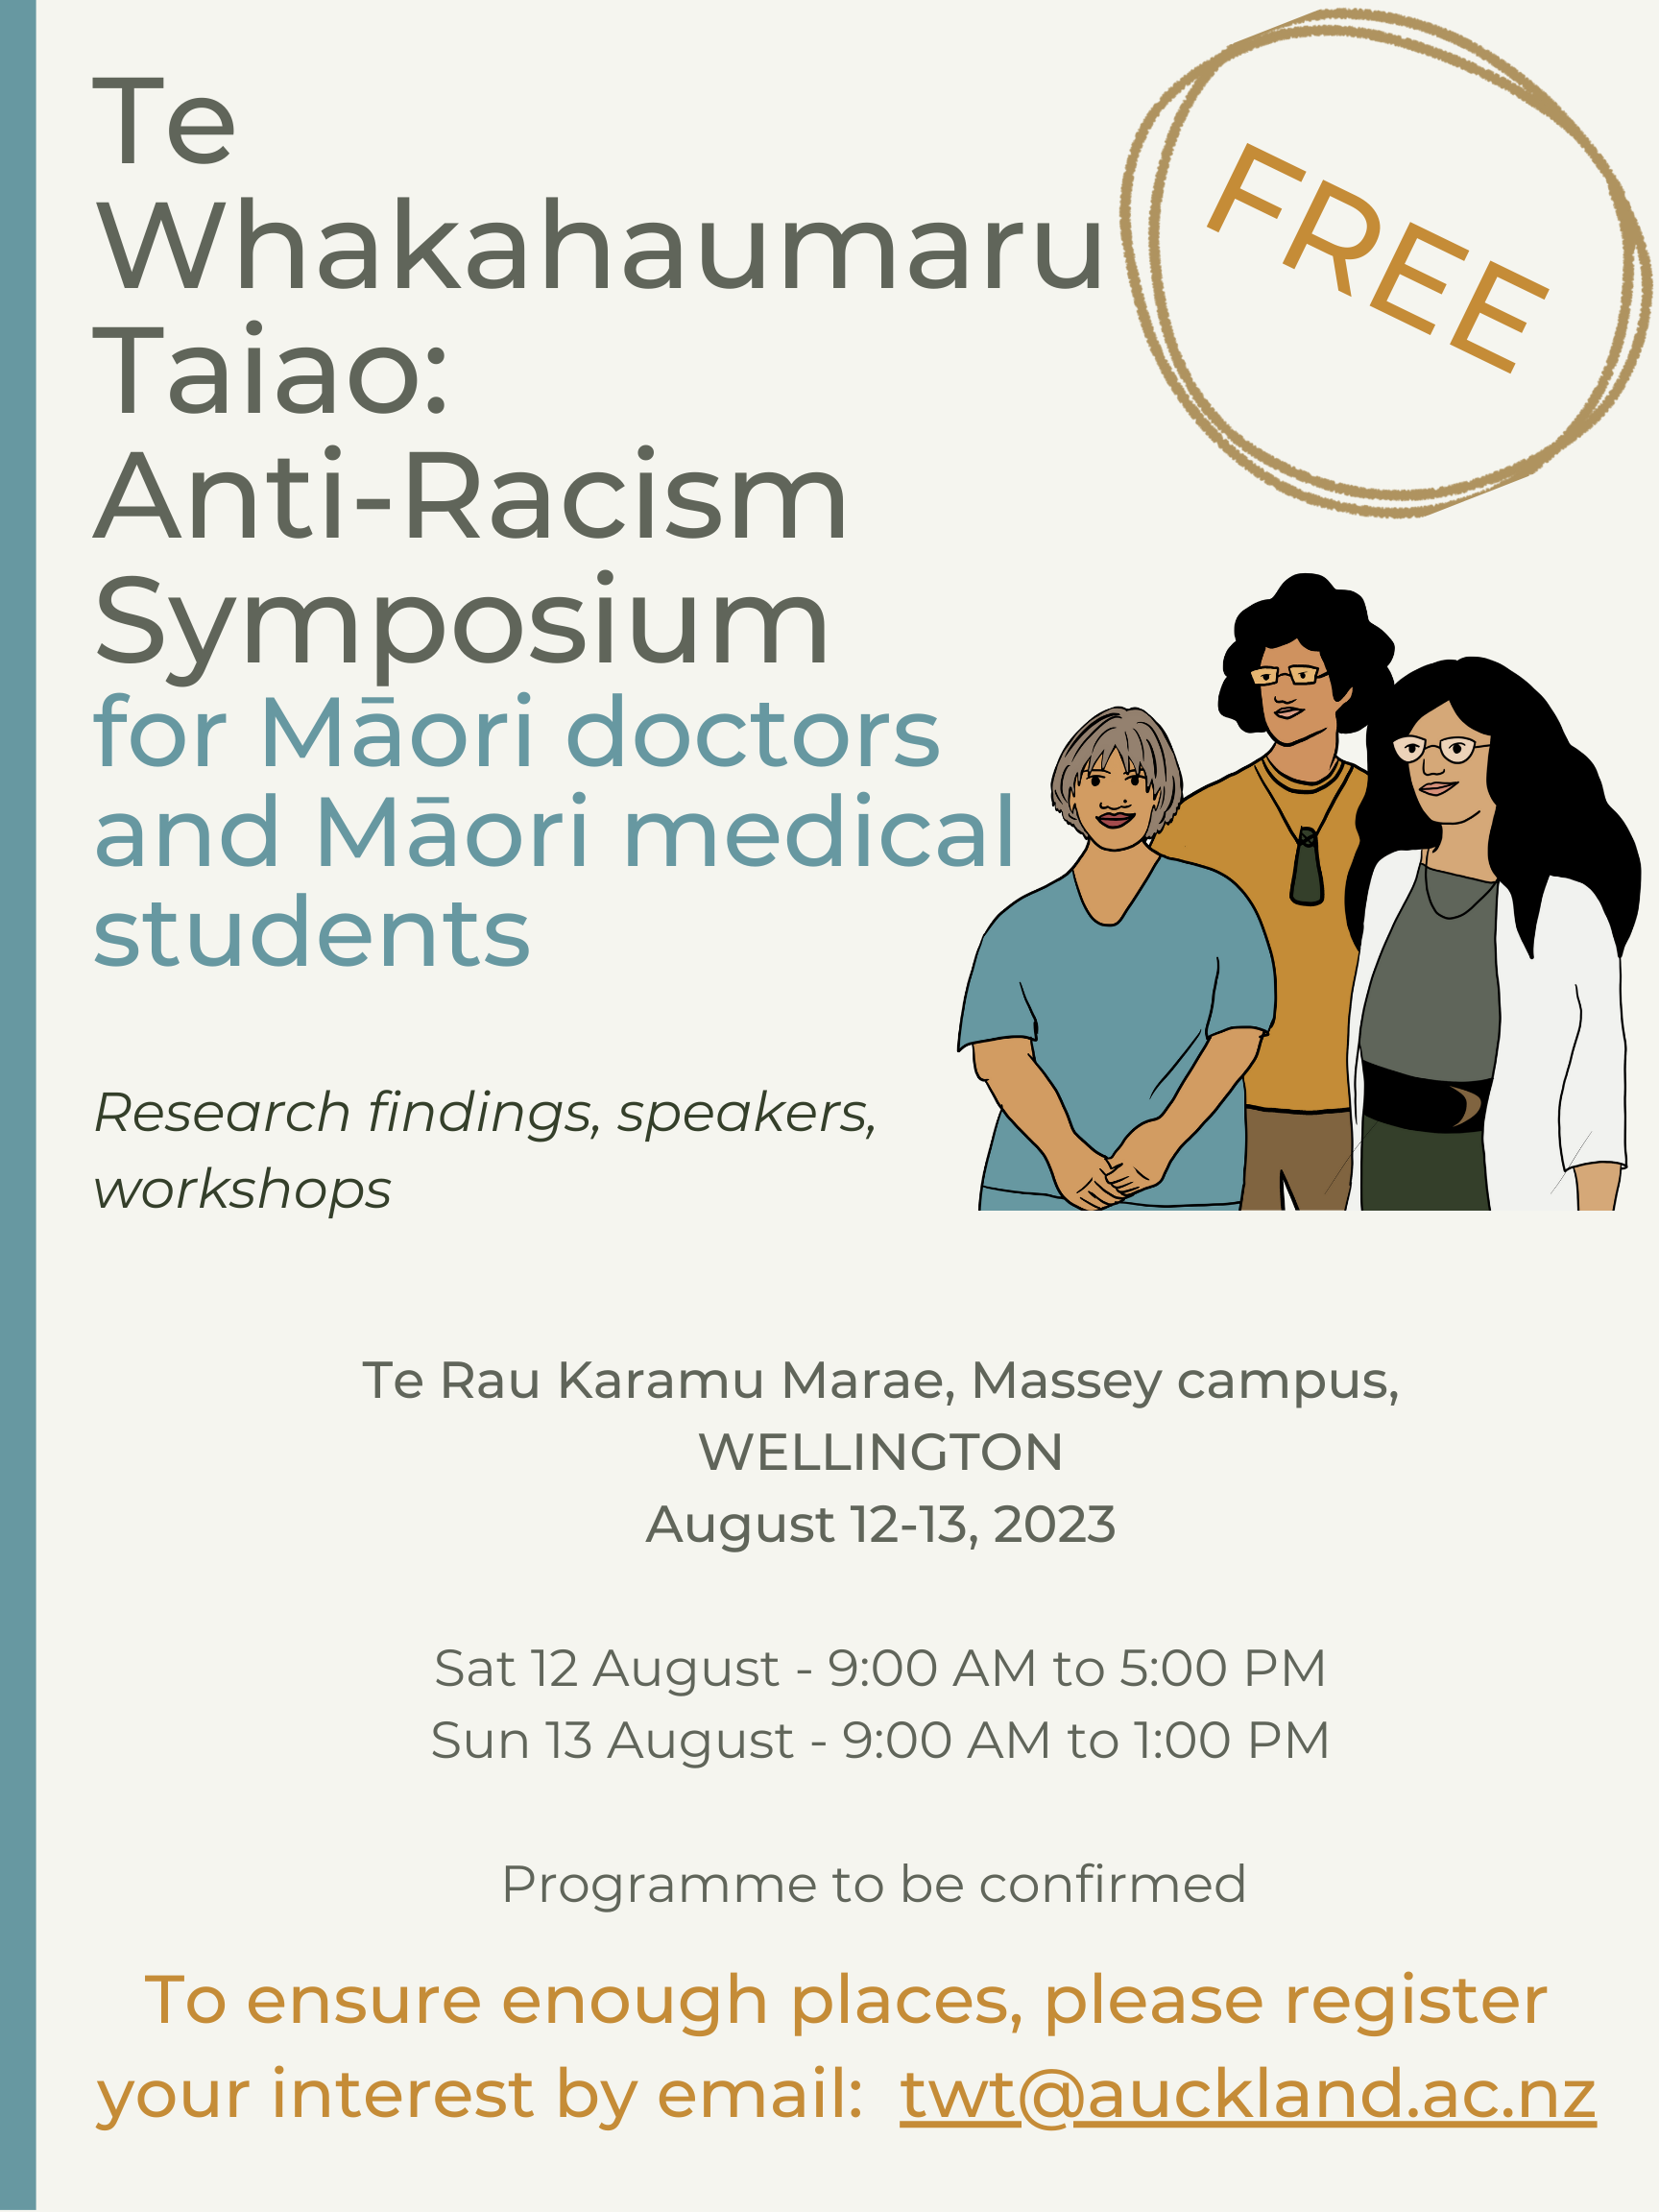 Poster asking Māori doctors and Māori medical students to register to attend an anti-racism symposium